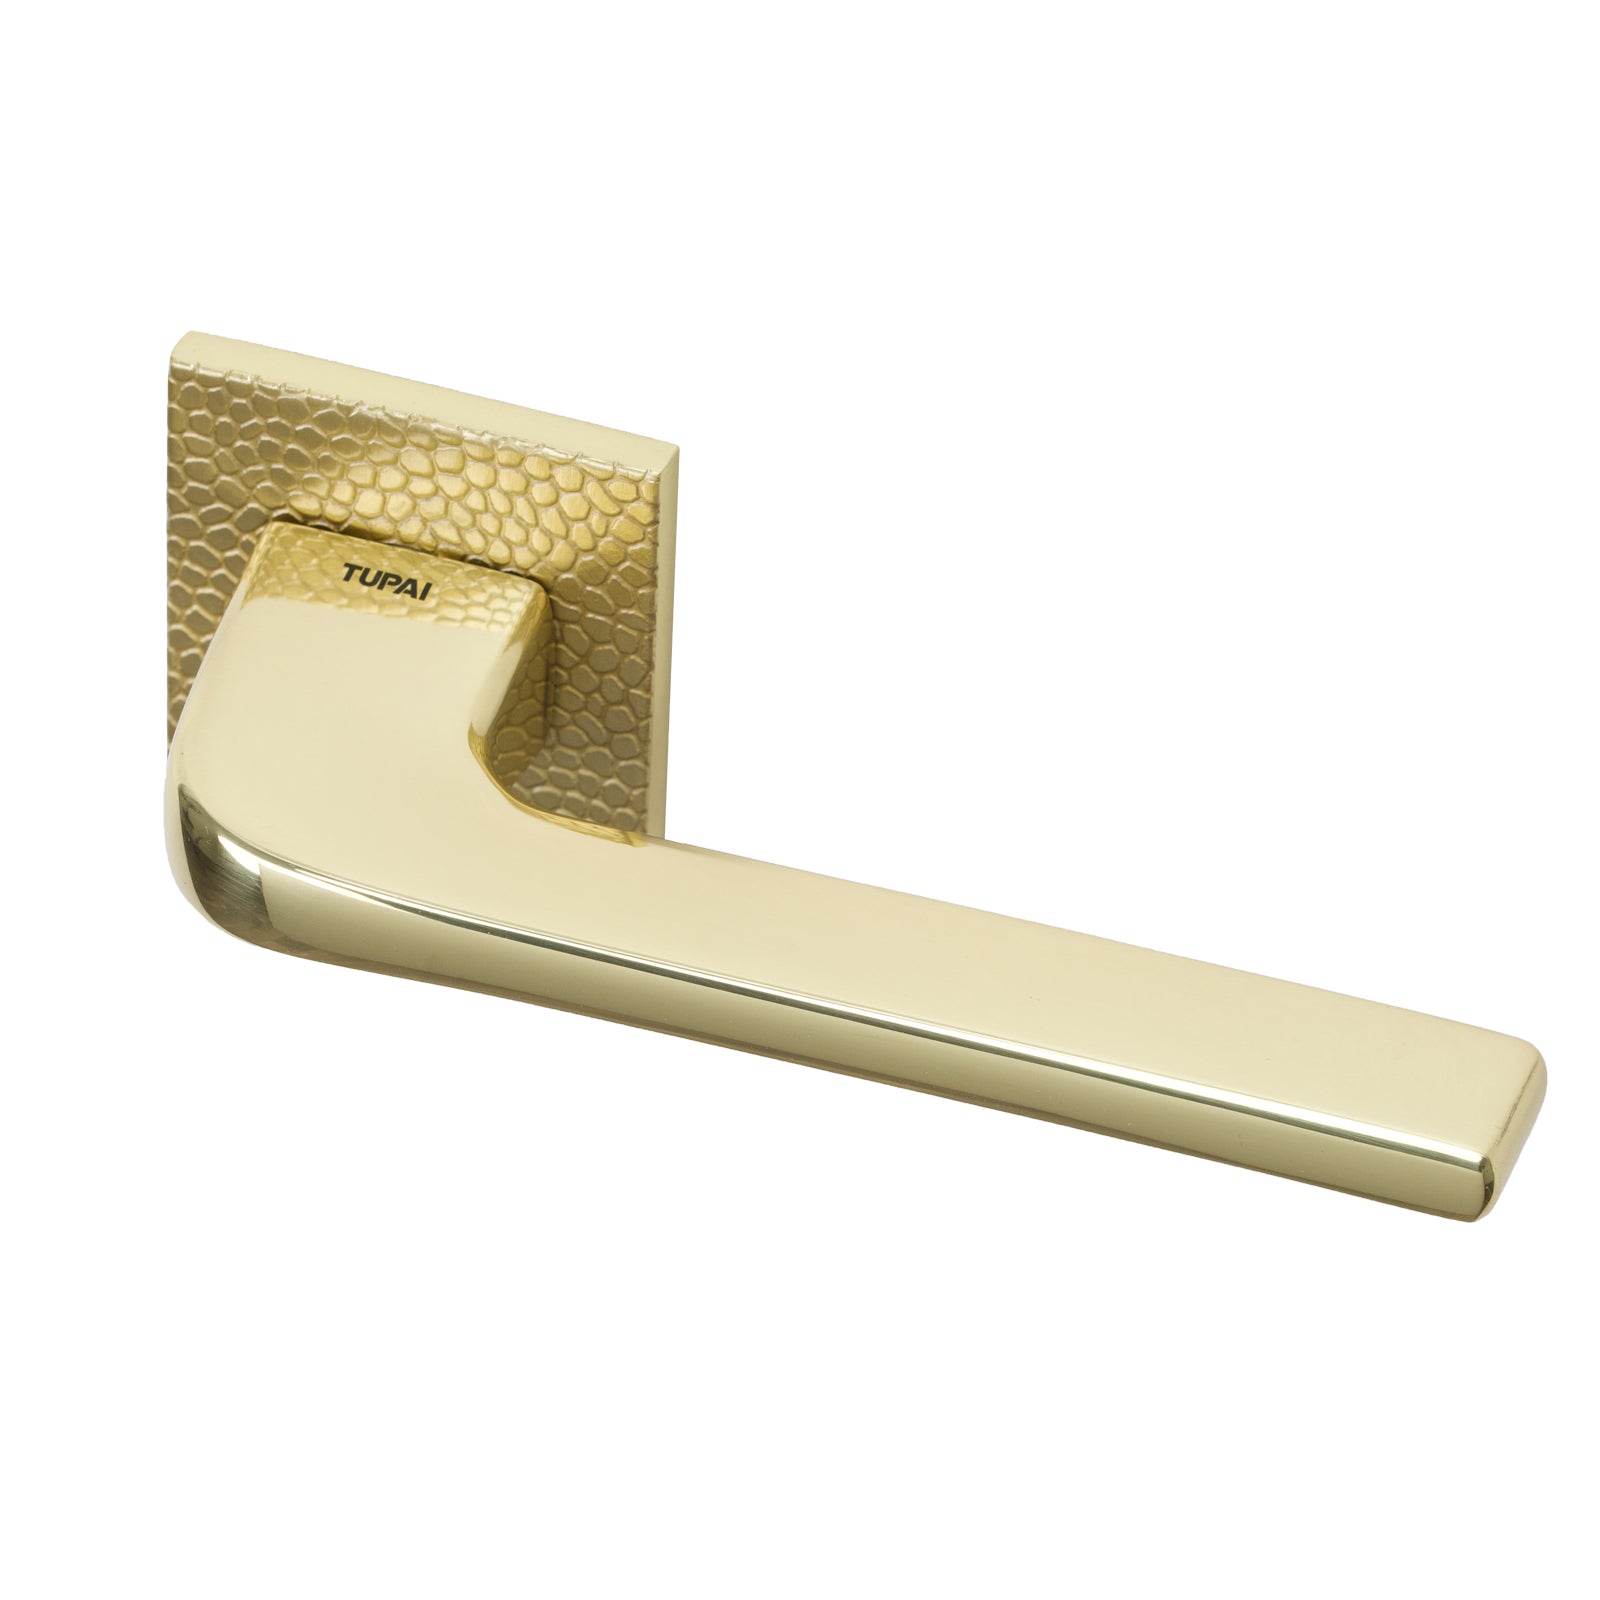 Tupai Perdrada Pebbles texture Lever on Square Rose Door Handle in Polished/Satin Brass Finish SHOW